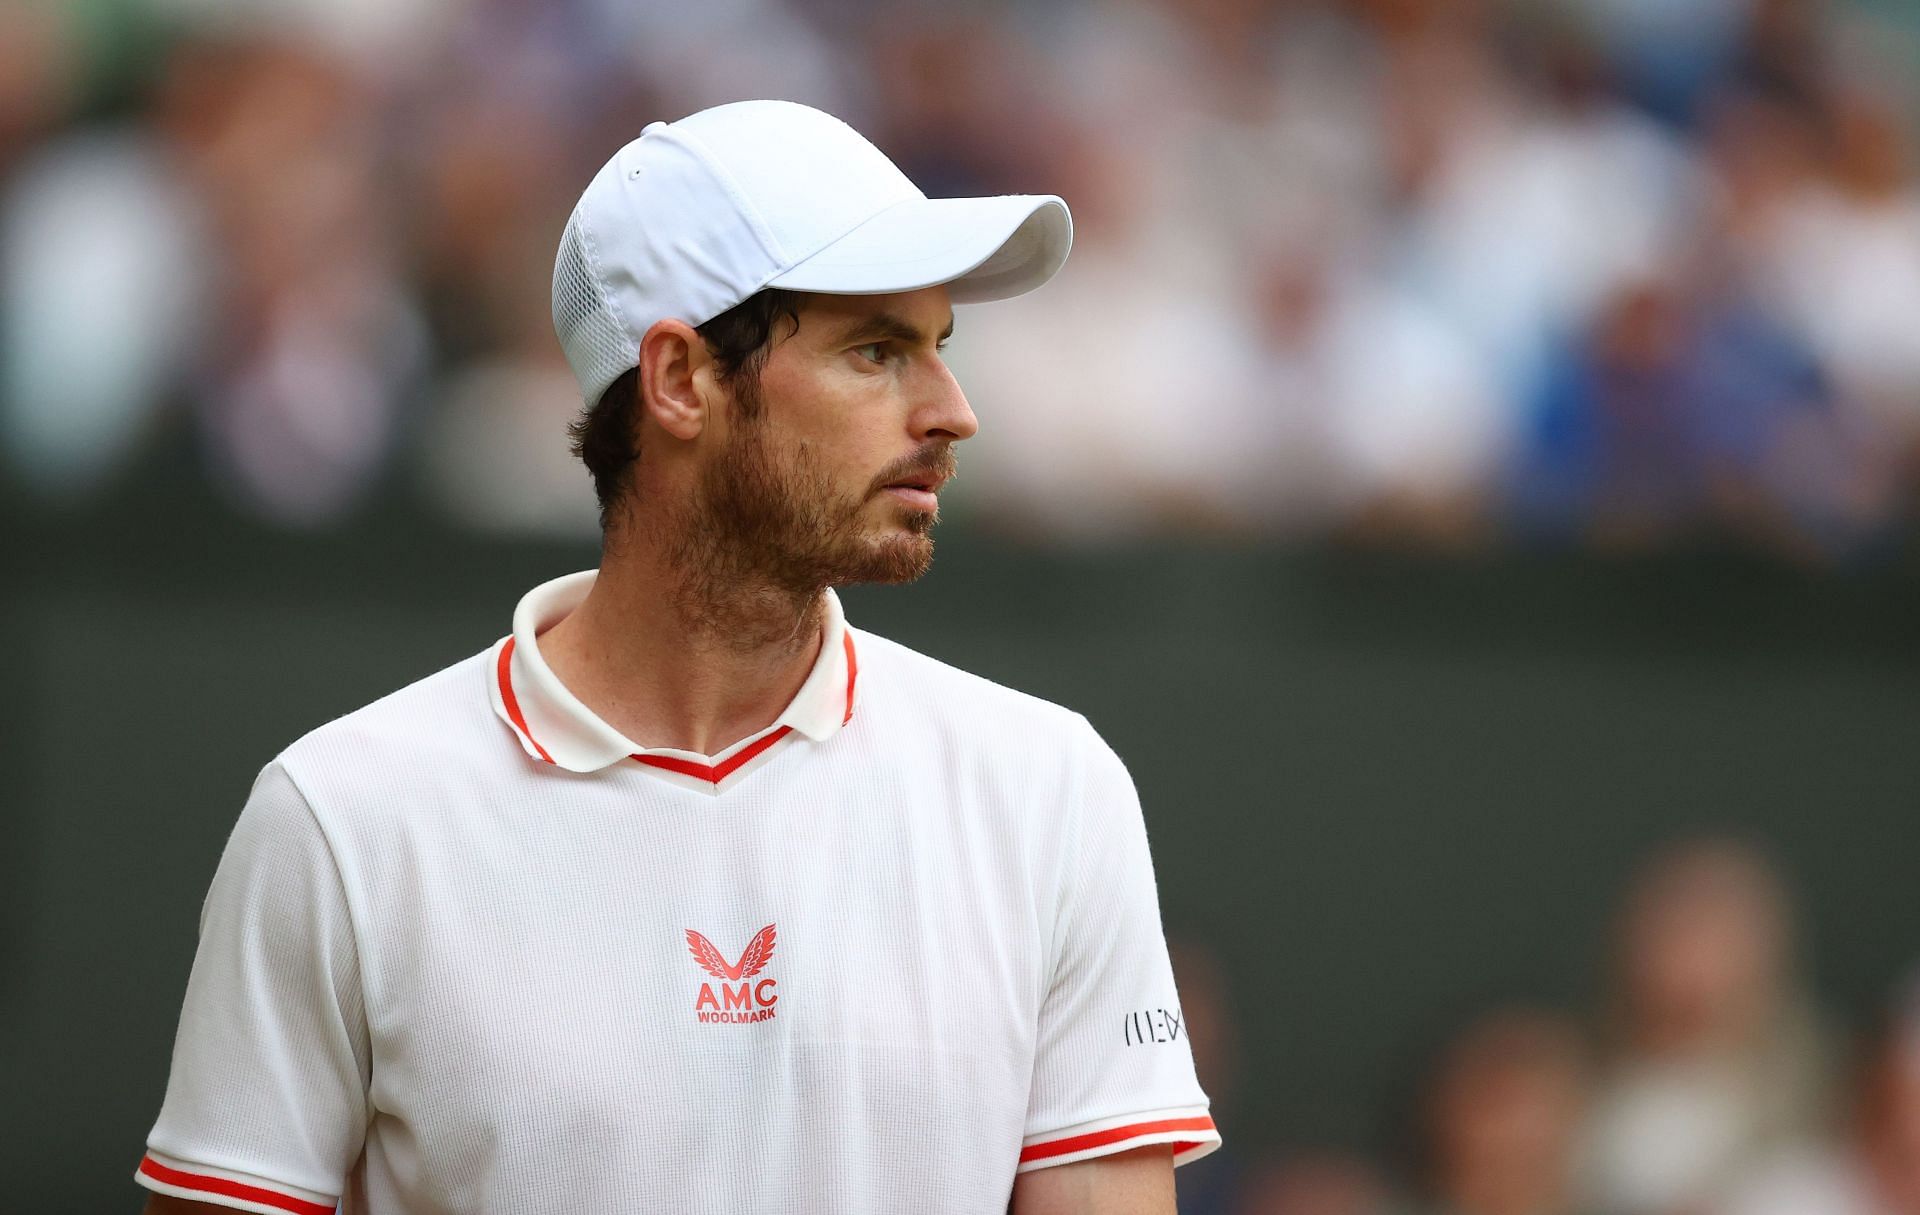 Andy Murray locks horns with James Duckworth in his opener at SW19